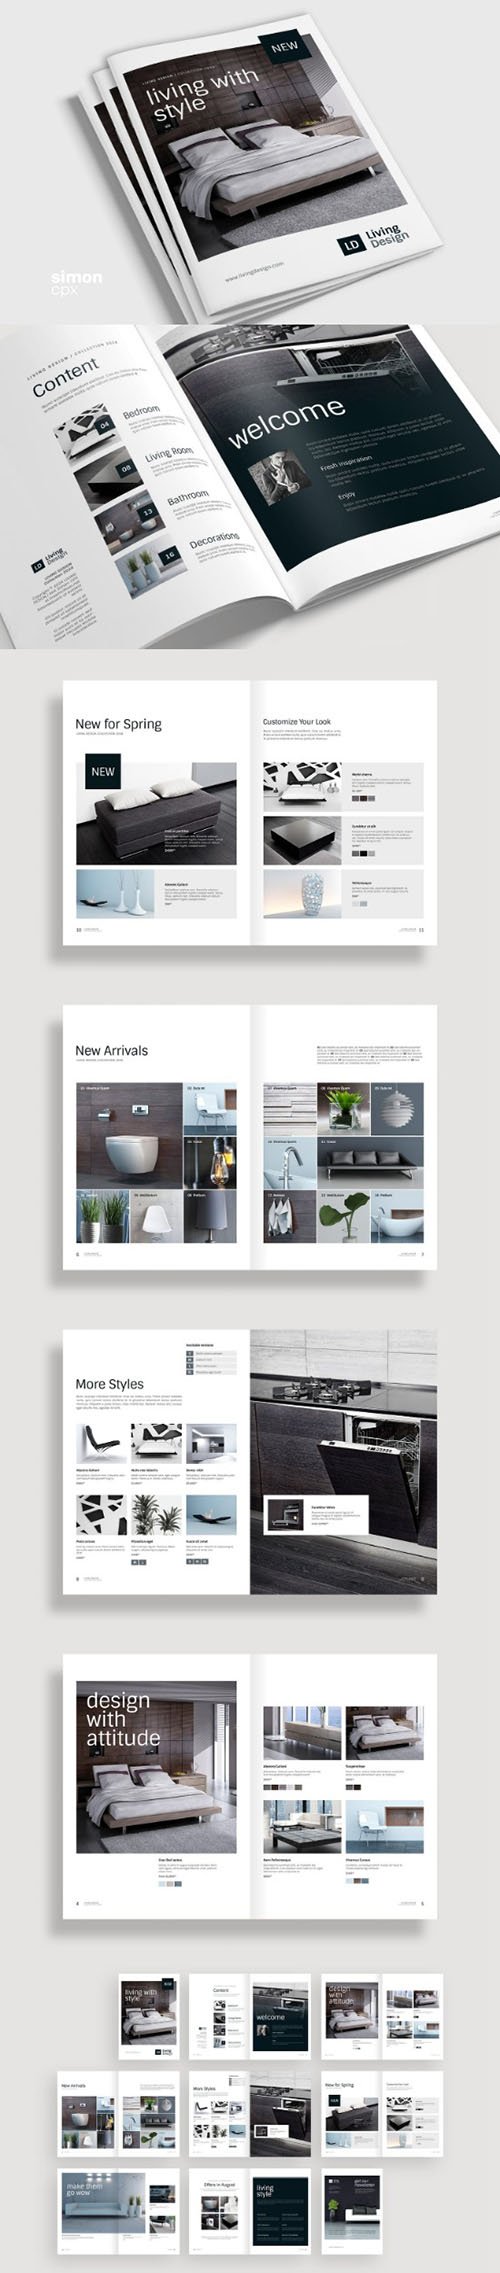 Living Design - Product Catalog Template